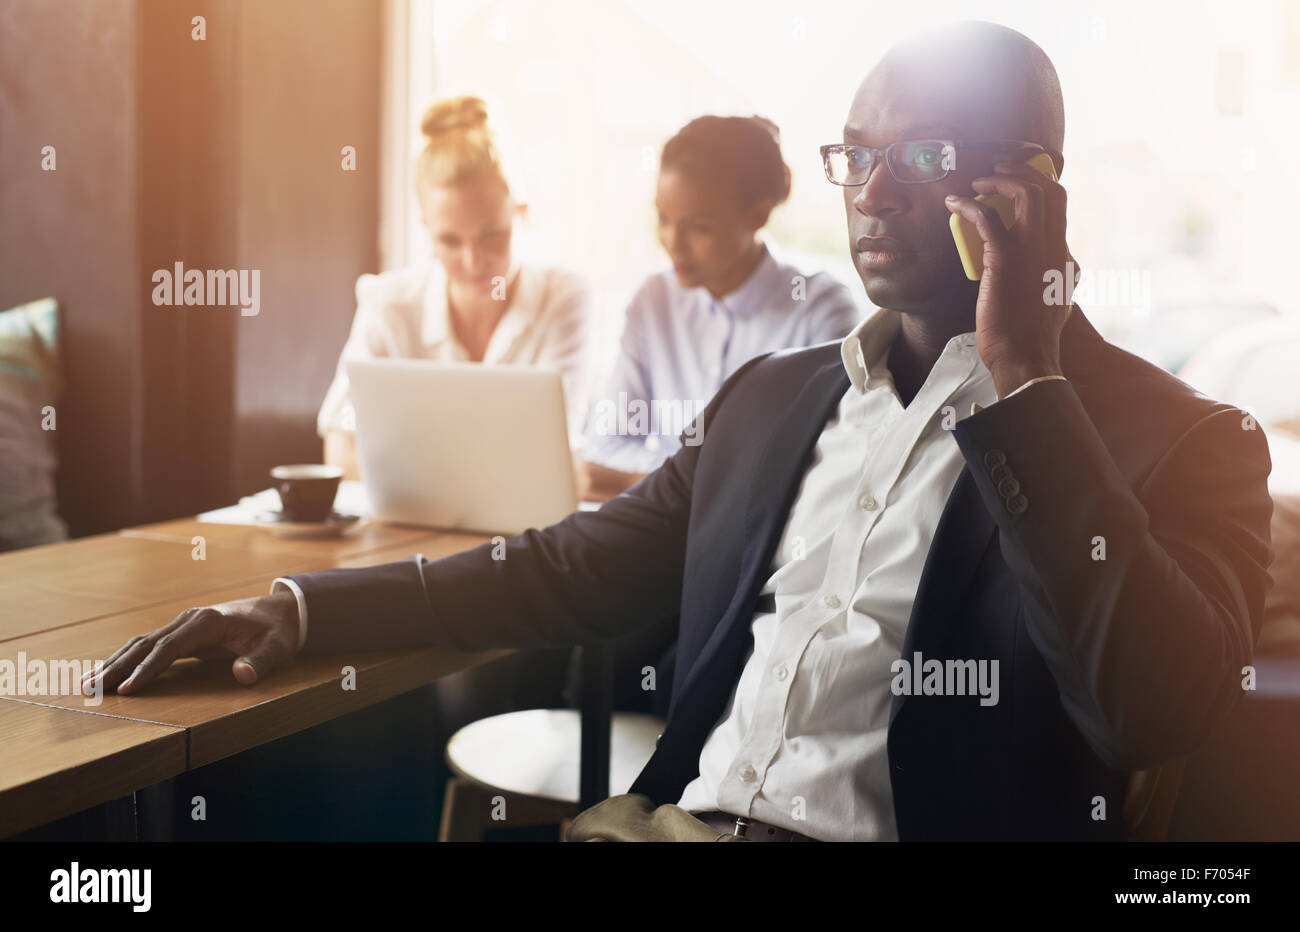 Black business man using cell phone, white and black business woman in background Stock Photo